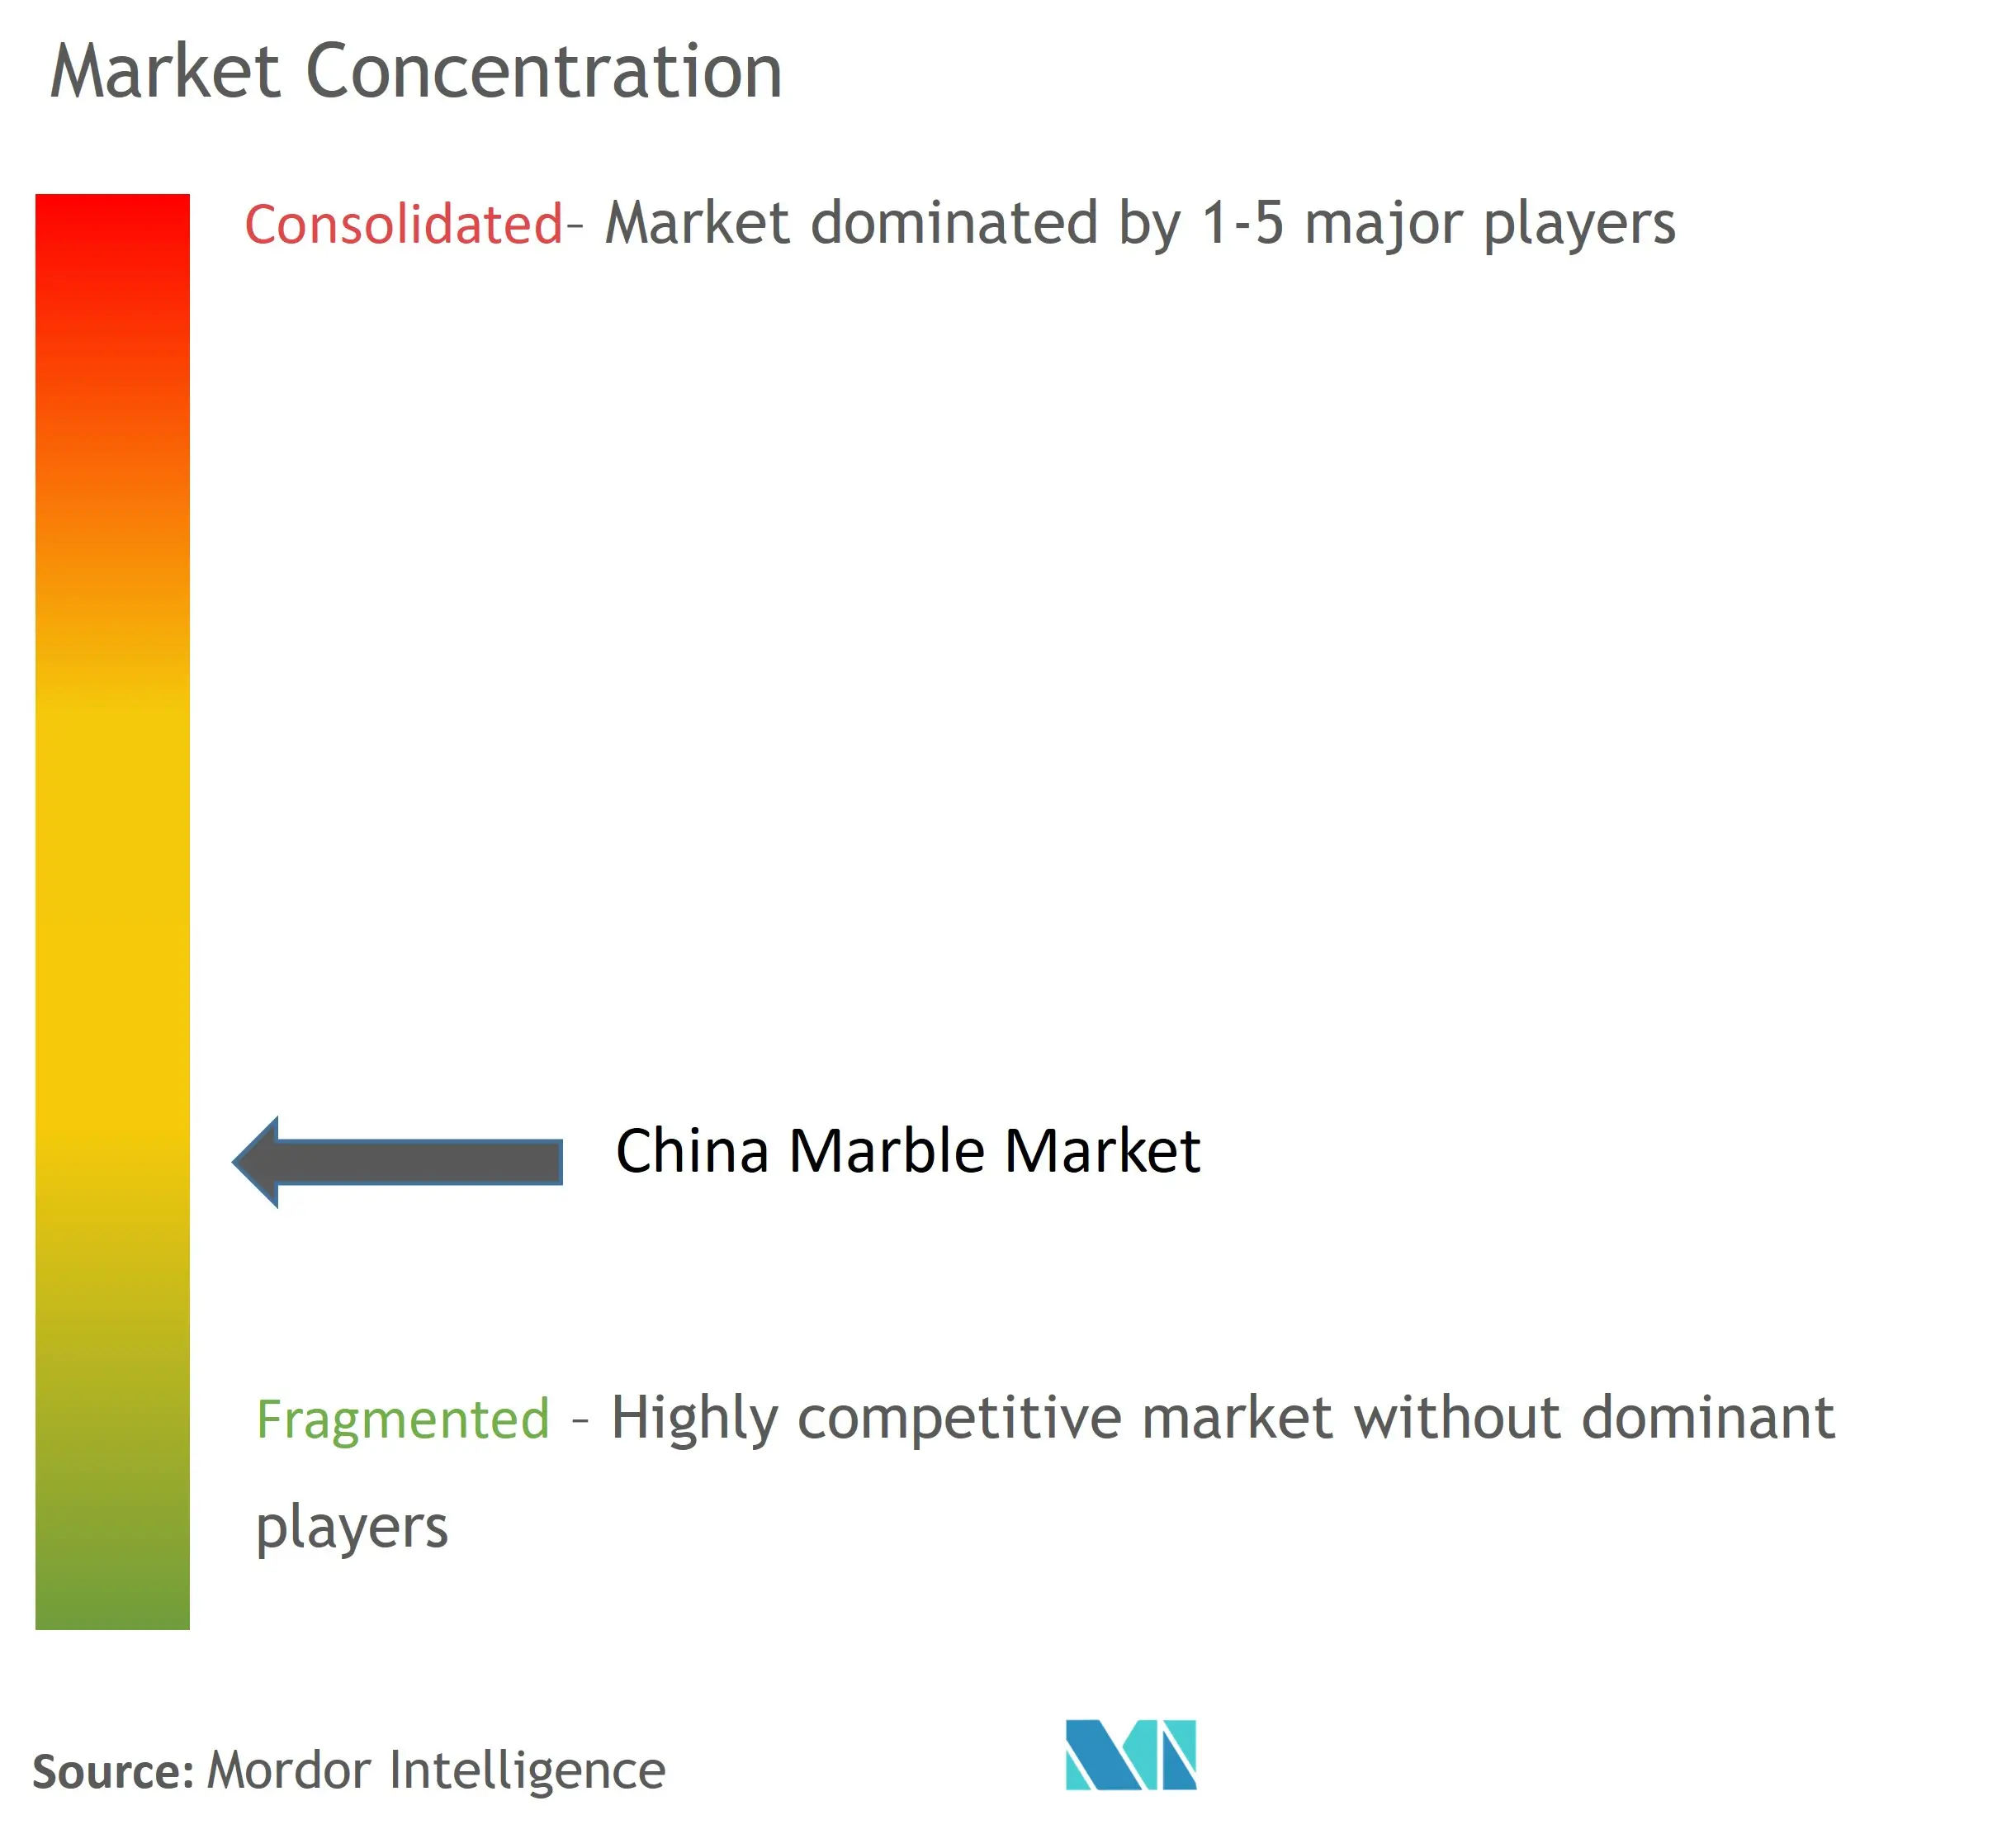 China Marble Market Concentration